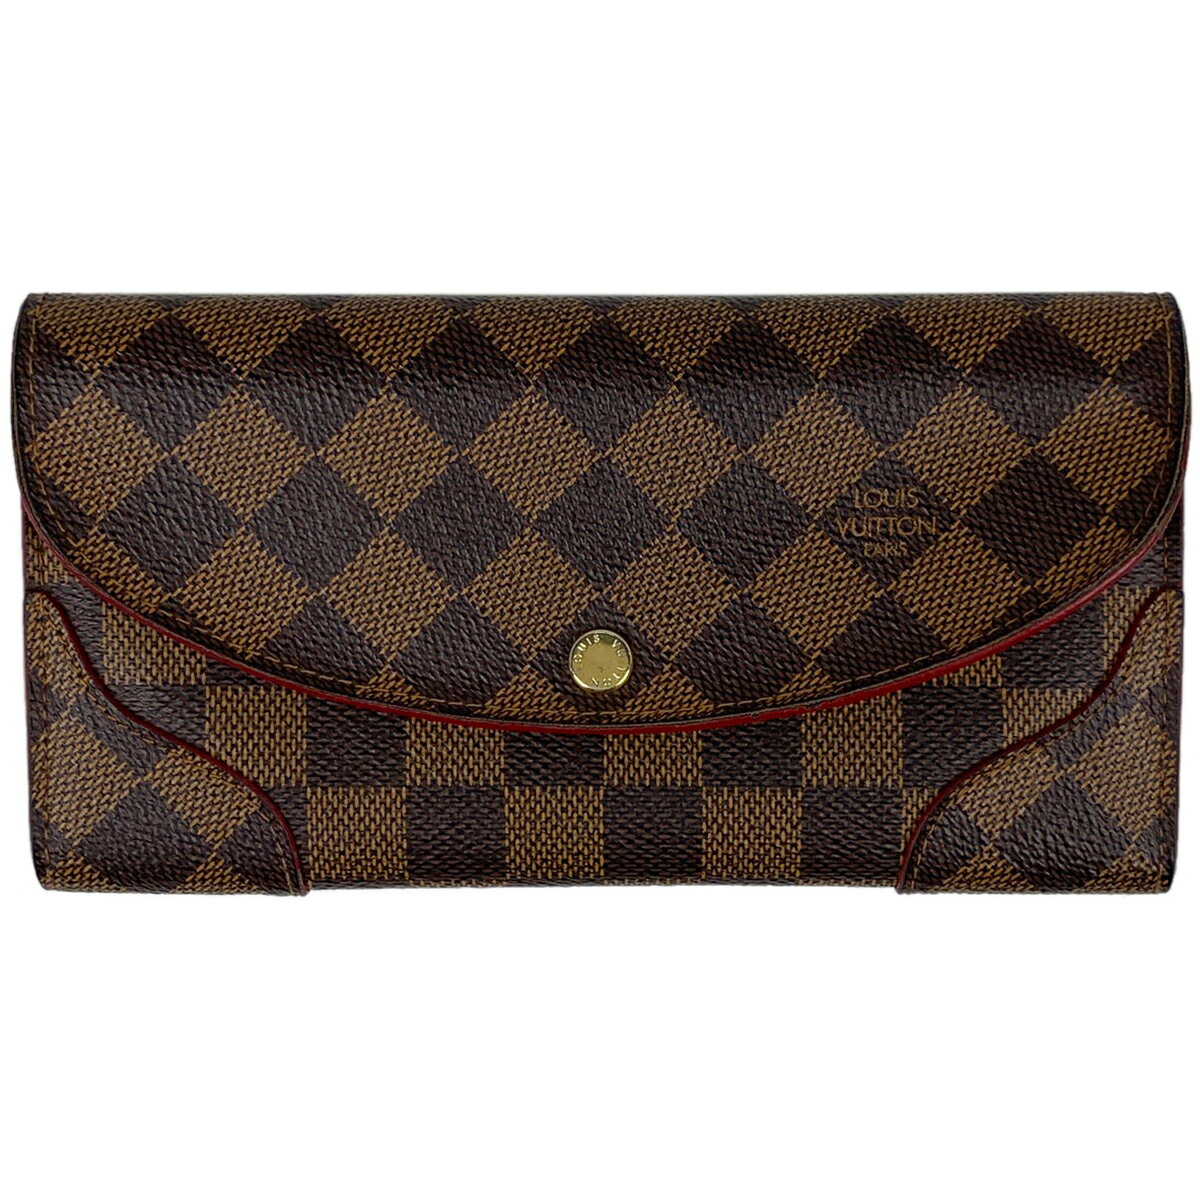 7OFF ybsOzCEBg Louis Vuitton |gtHC JCT ܂ z _~G uE X[Y N61221 fB[X yÁz msp29